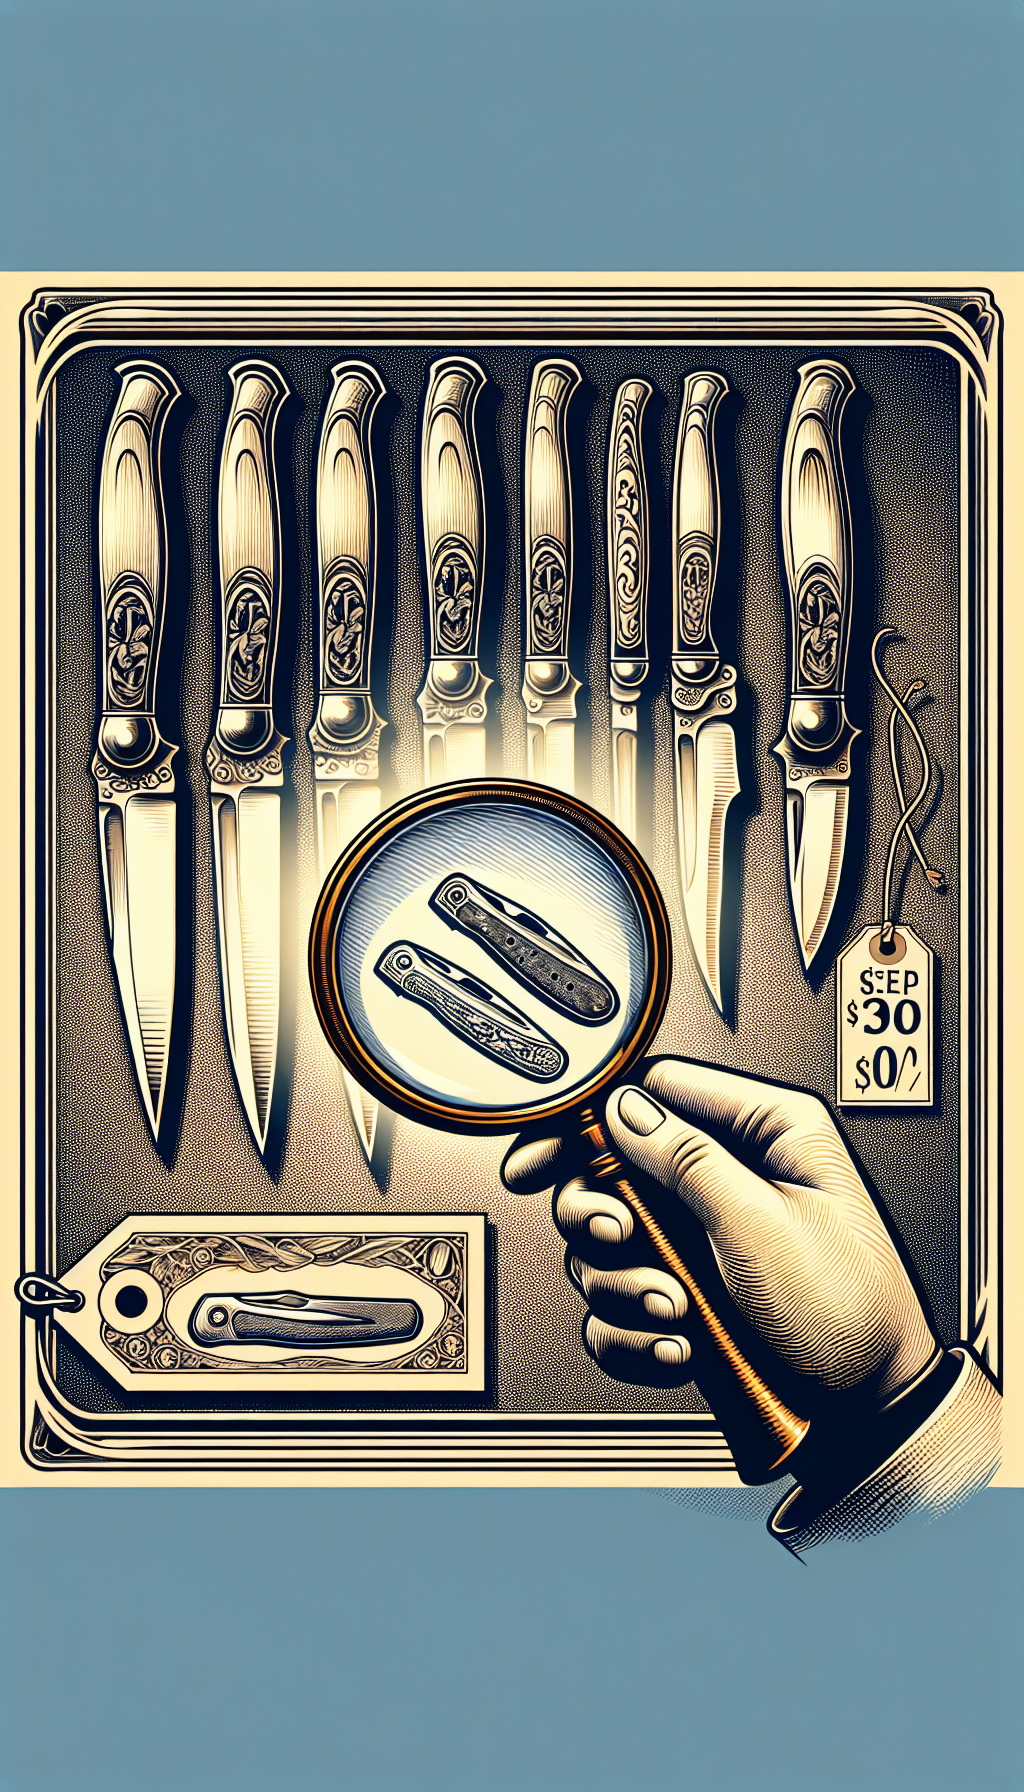 An illustration depicting an antique magnifying glass hovering over a series of vintage Case knives aligned chronologically, each with a different tang stamp glowing beneath. The oldest knife at the forefront is framed by an ornate price tag with a hefty sum, symbolizing its value, while visually blending art nouveau and flat design to contrast historical richness with modern simplicity.